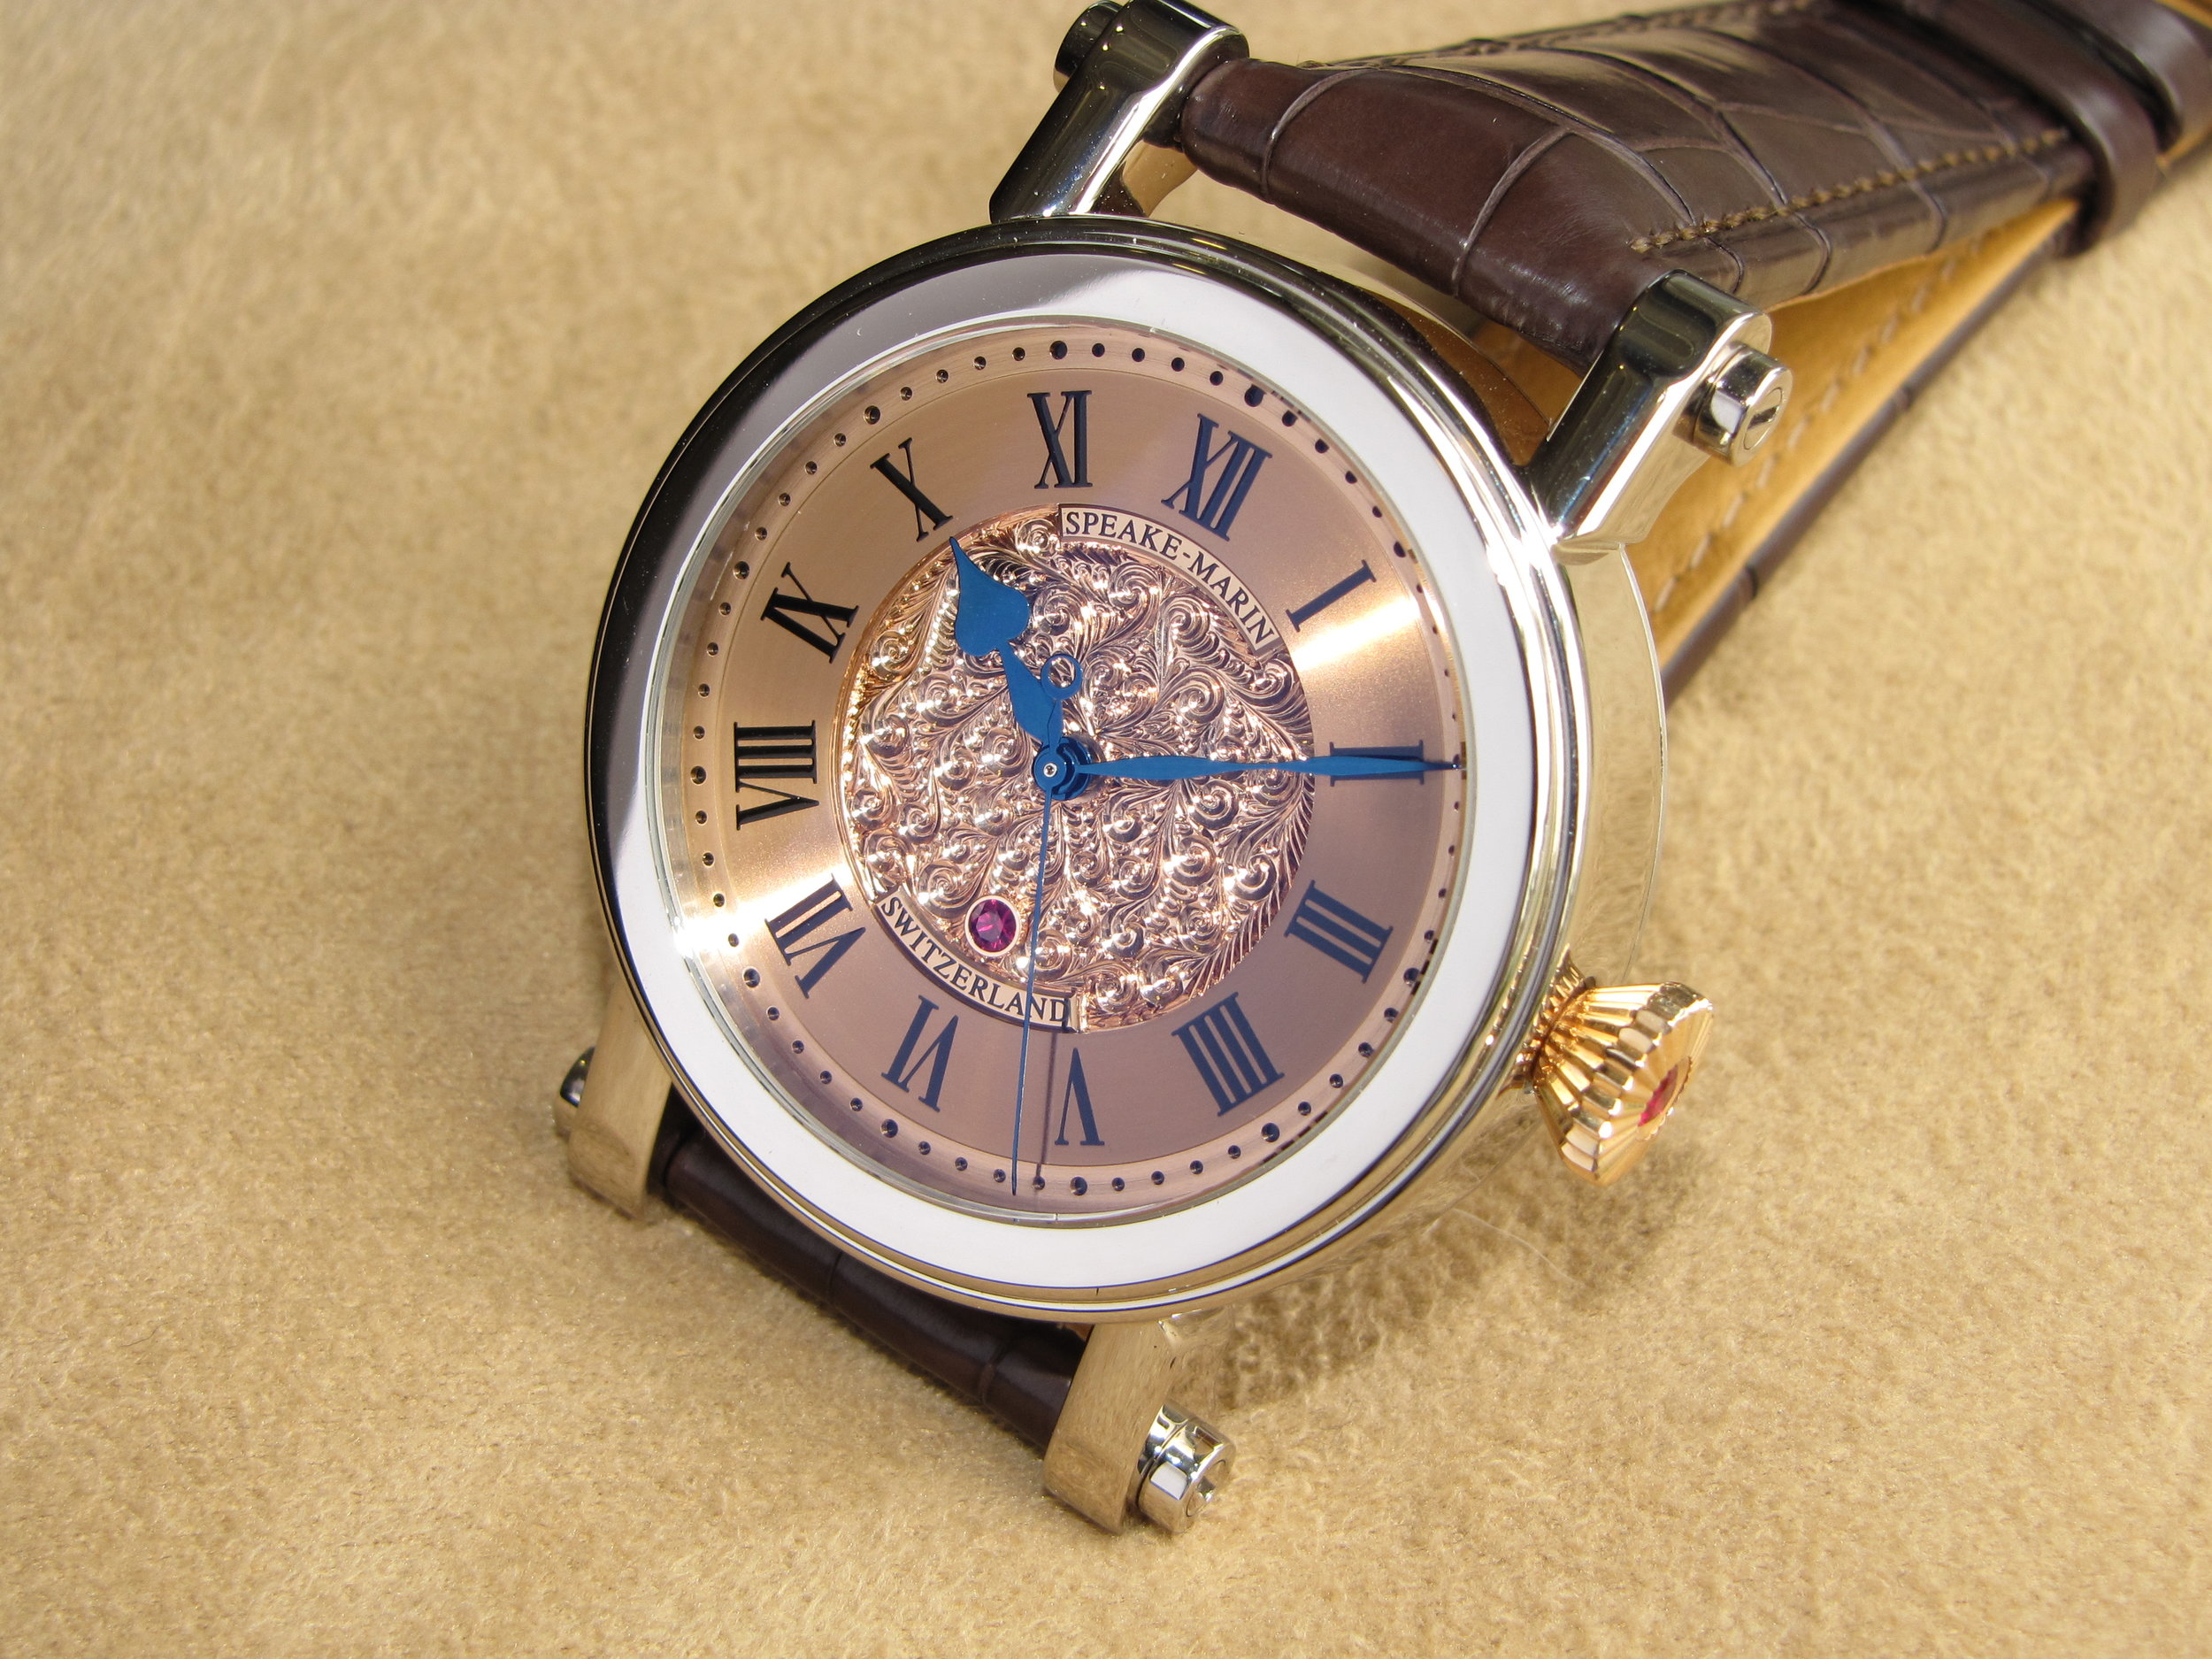 Unique 18k WG Piccadilly engraved dial 42mm